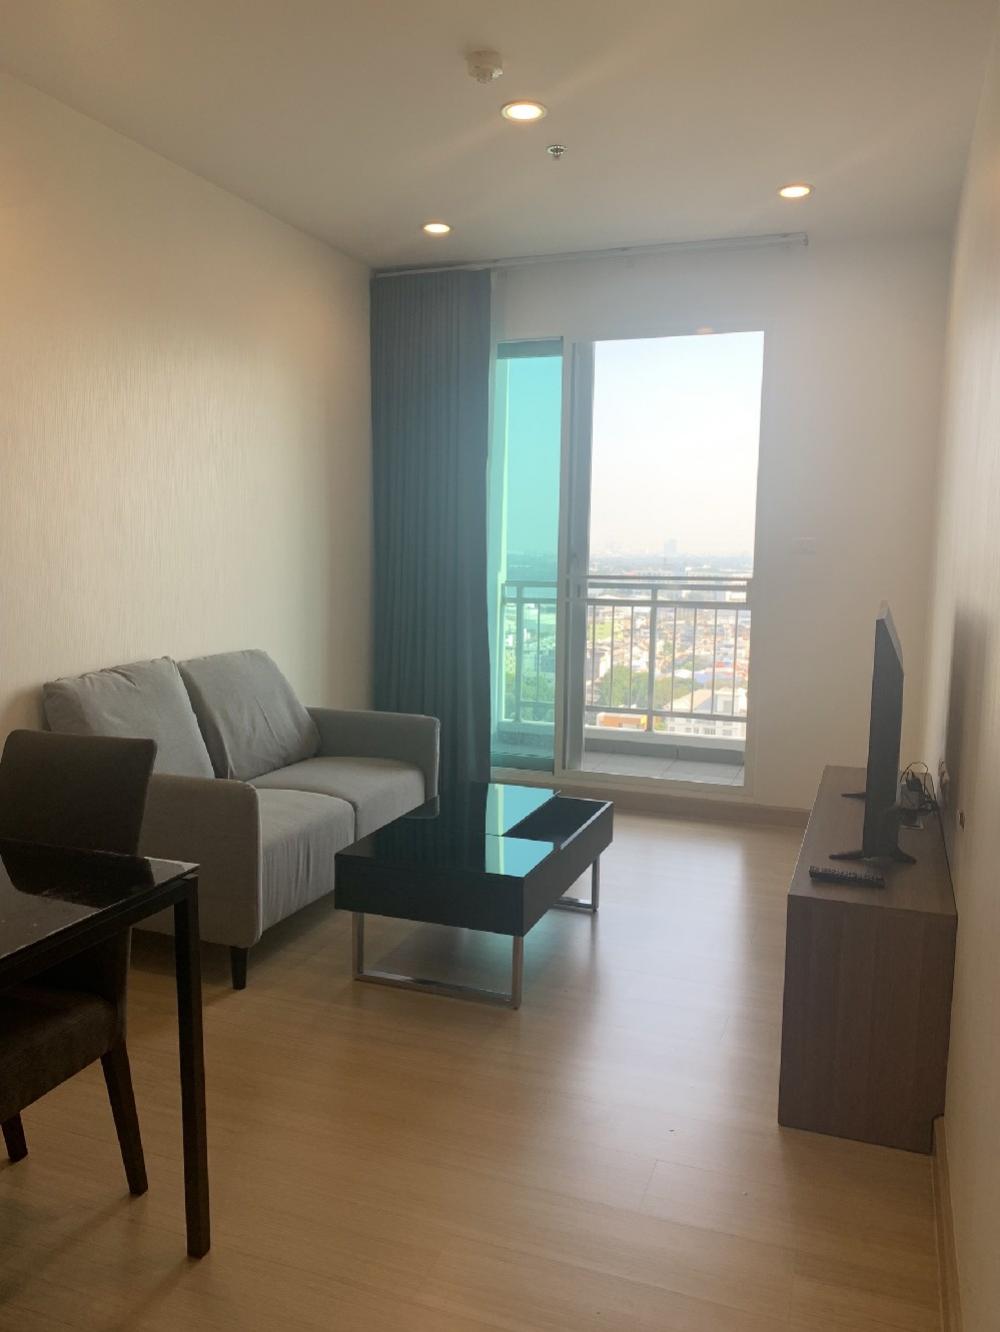 For RentCondoSathorn, Narathiwat : For rent, Supalai Lite Ratchada Narathiwat Sathorn, 19th floor, size 50 sq m., fully furnished, ready to move in.